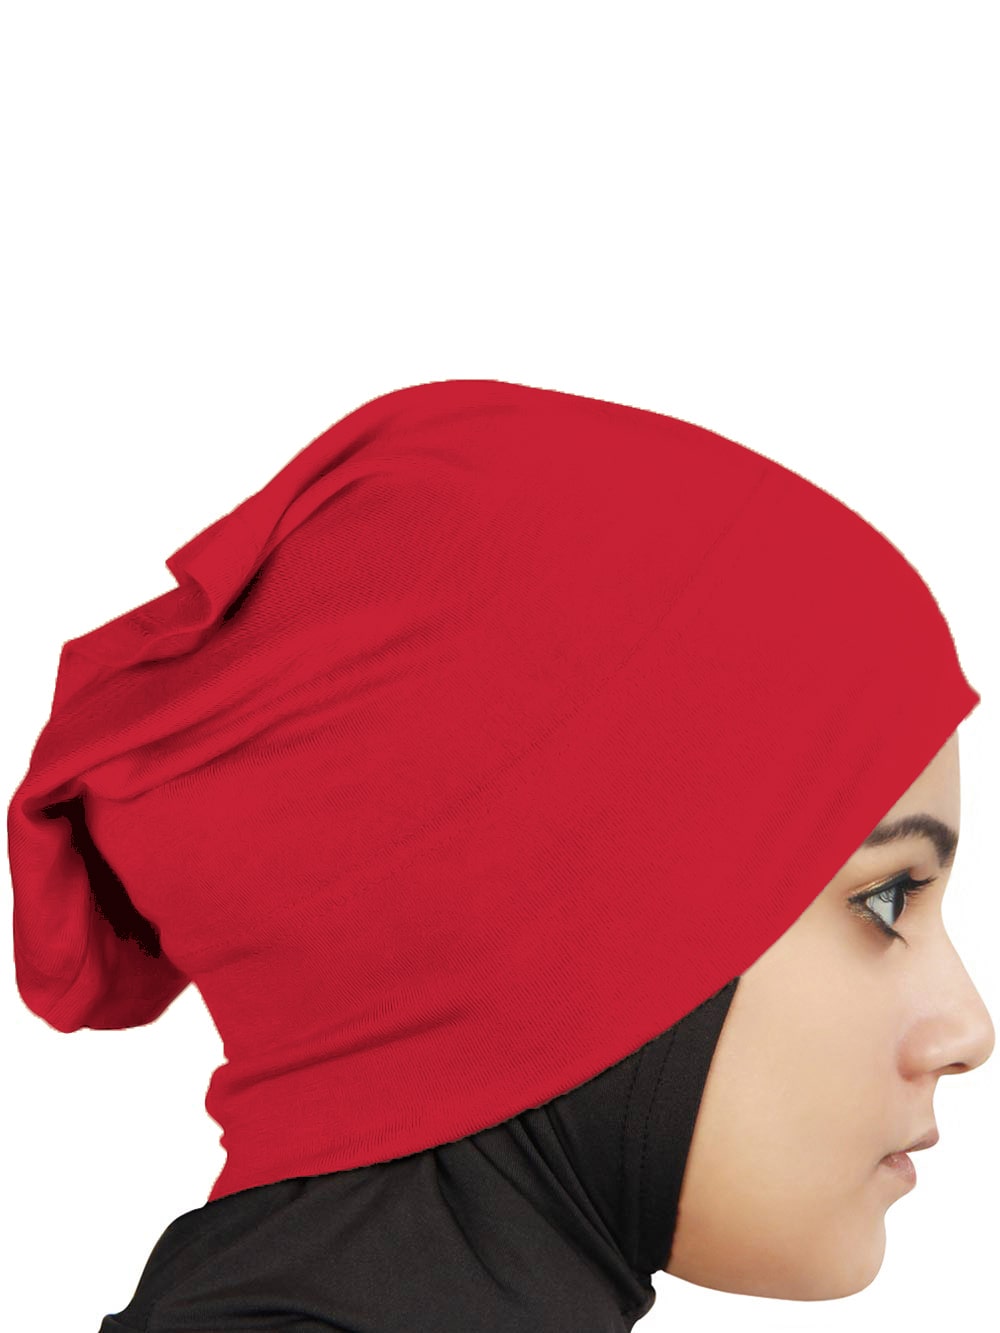 Two Piece Instant Red Viscose Jersey Hijab